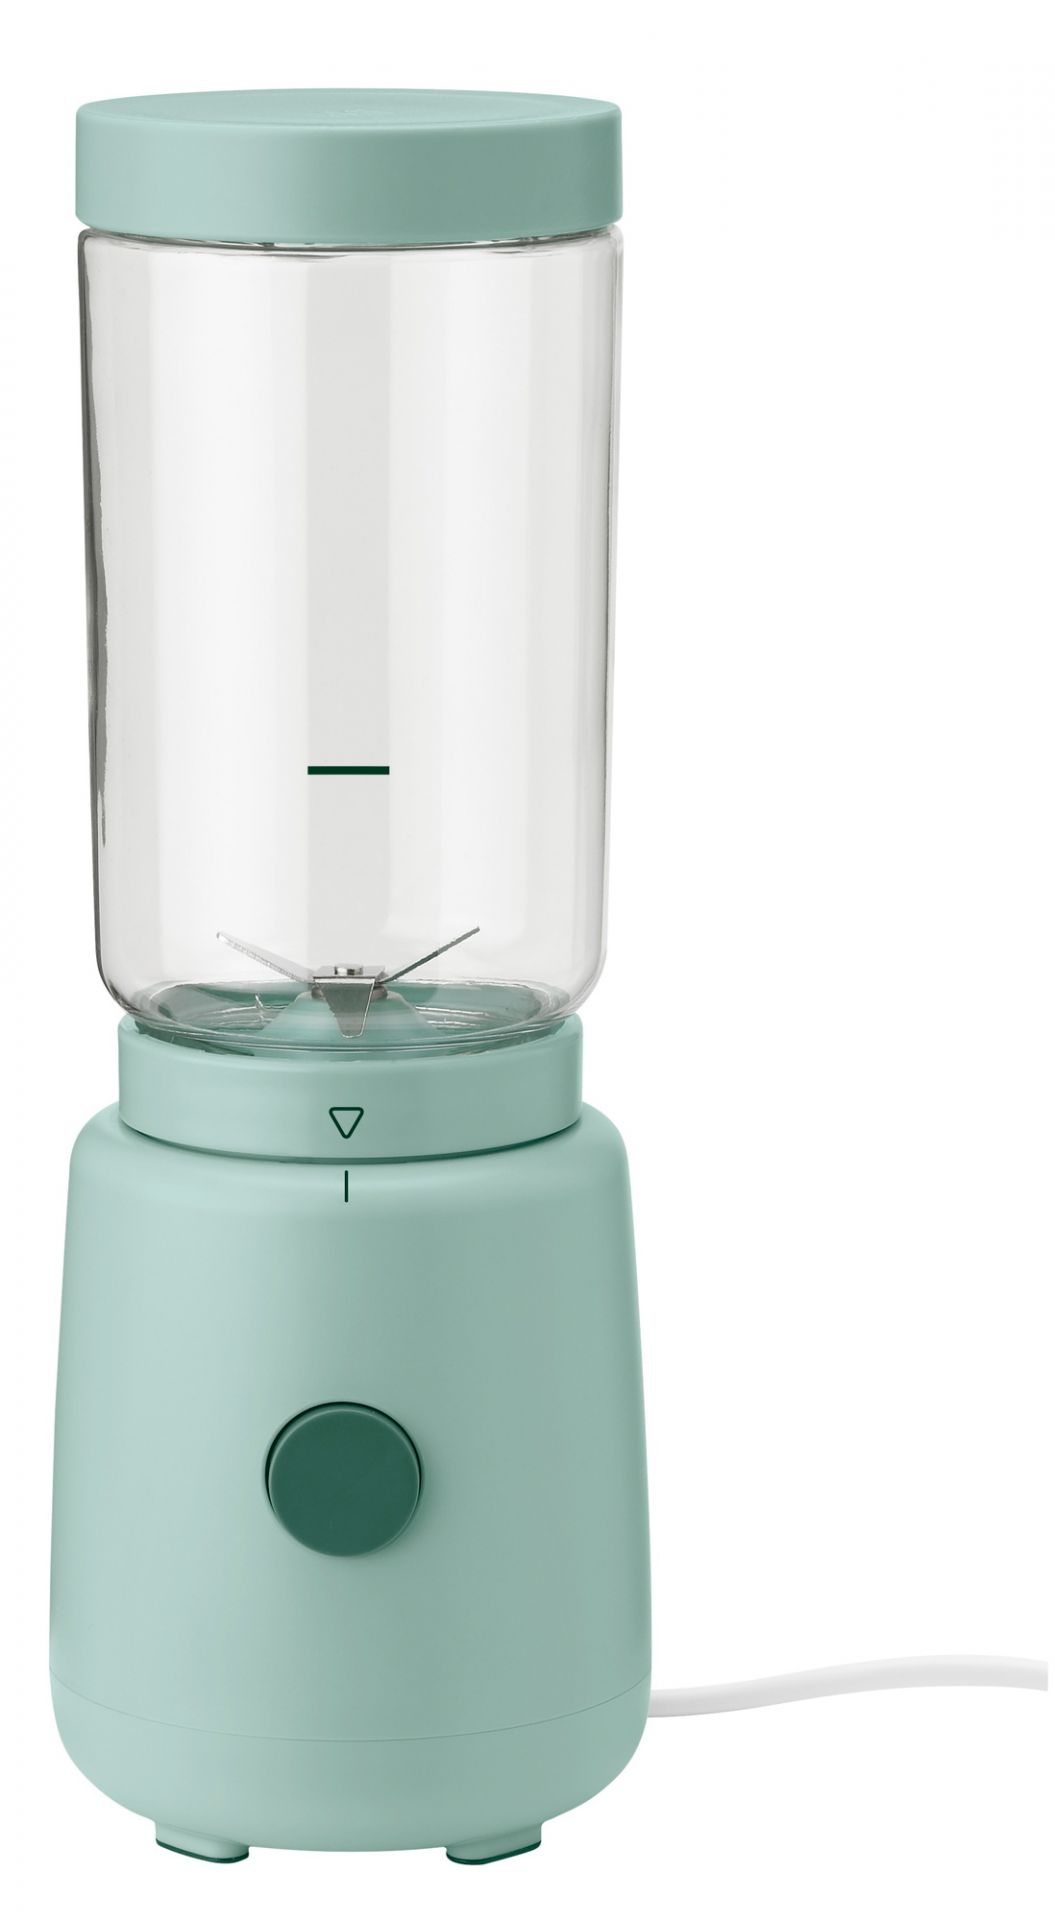 Foodie Smoothie blender Mixeur à smoothie Vert clair RIG TIG by Stelton  OFFRE SPECIALE